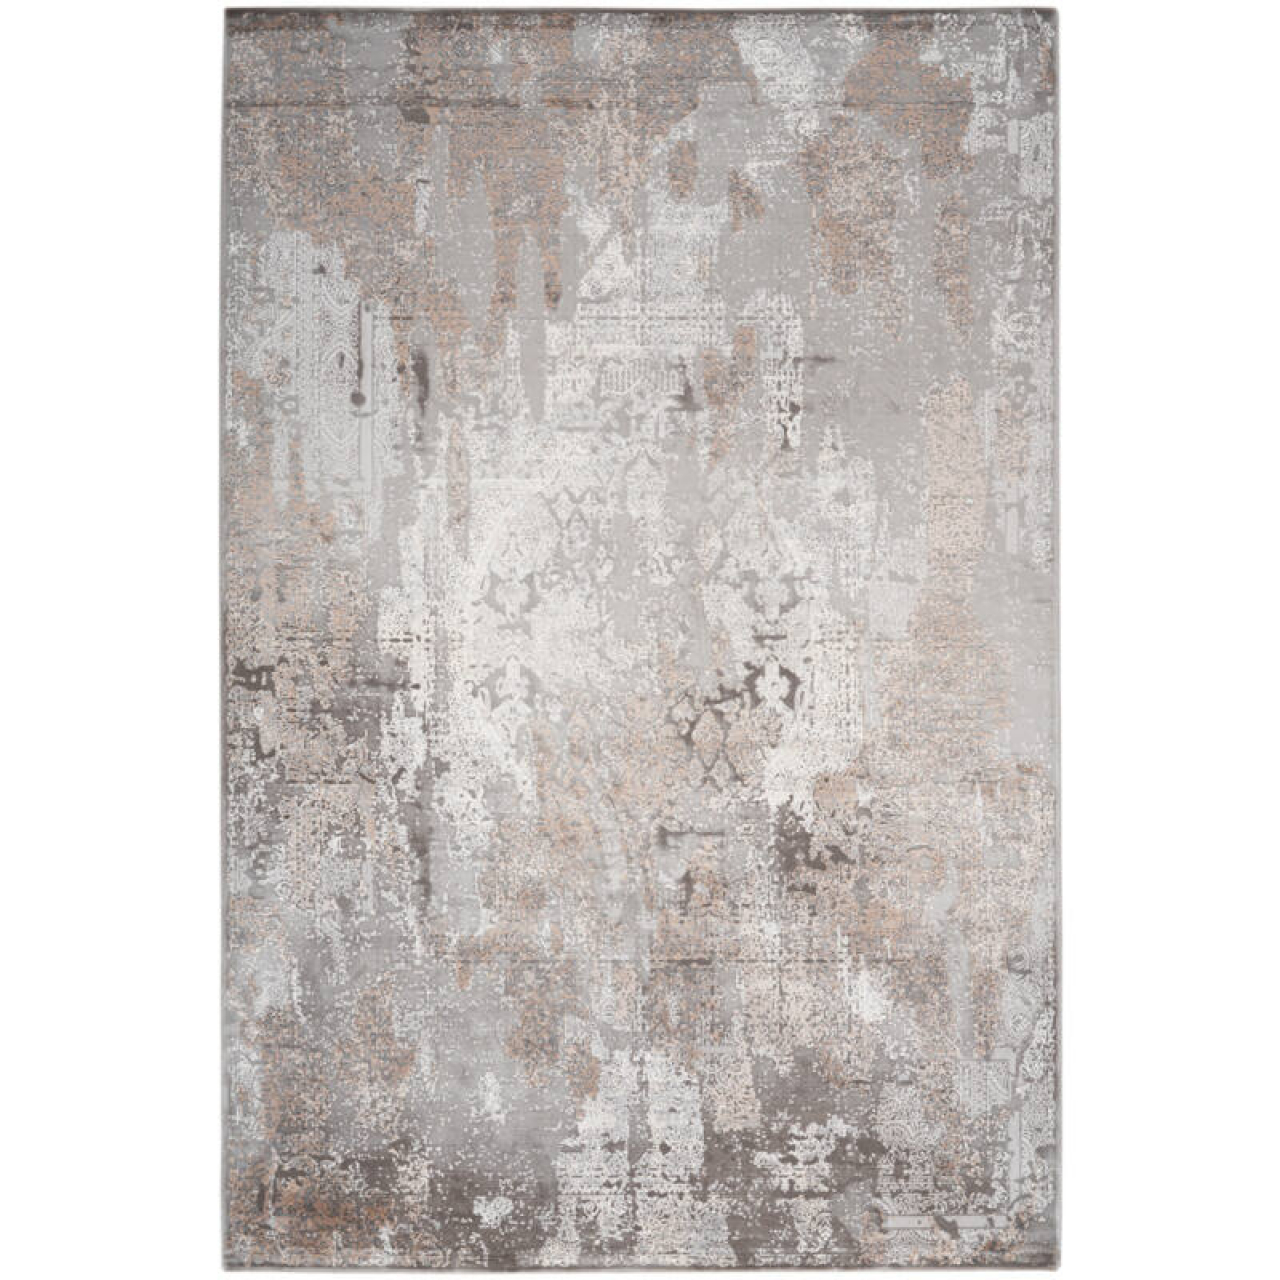 Obsession Haute Couture Jewel 951 Taupe szőnyeg-200x290